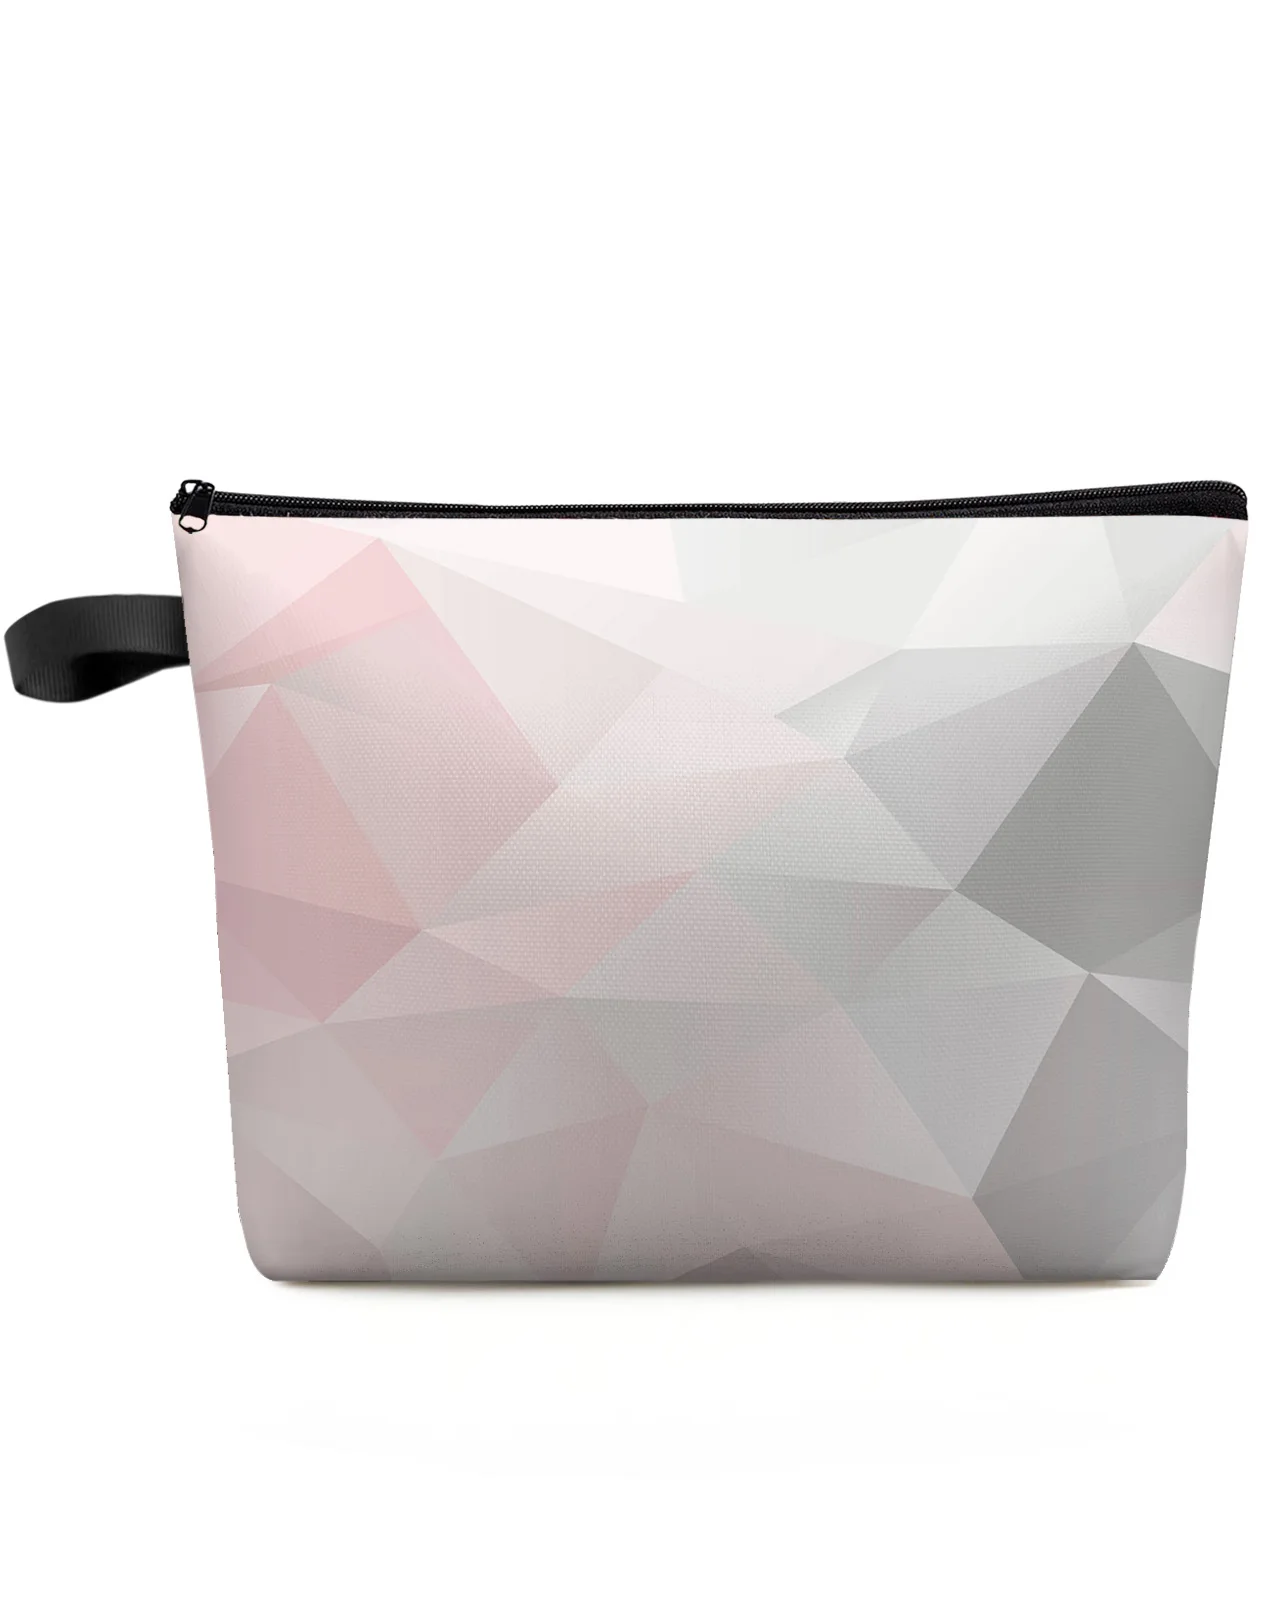 

Geometric Pink Gray Gradient Triangle Makeup Bag Pouch Travel Essentials Women Cosmetic Bags Organizer Storage Pencil Case